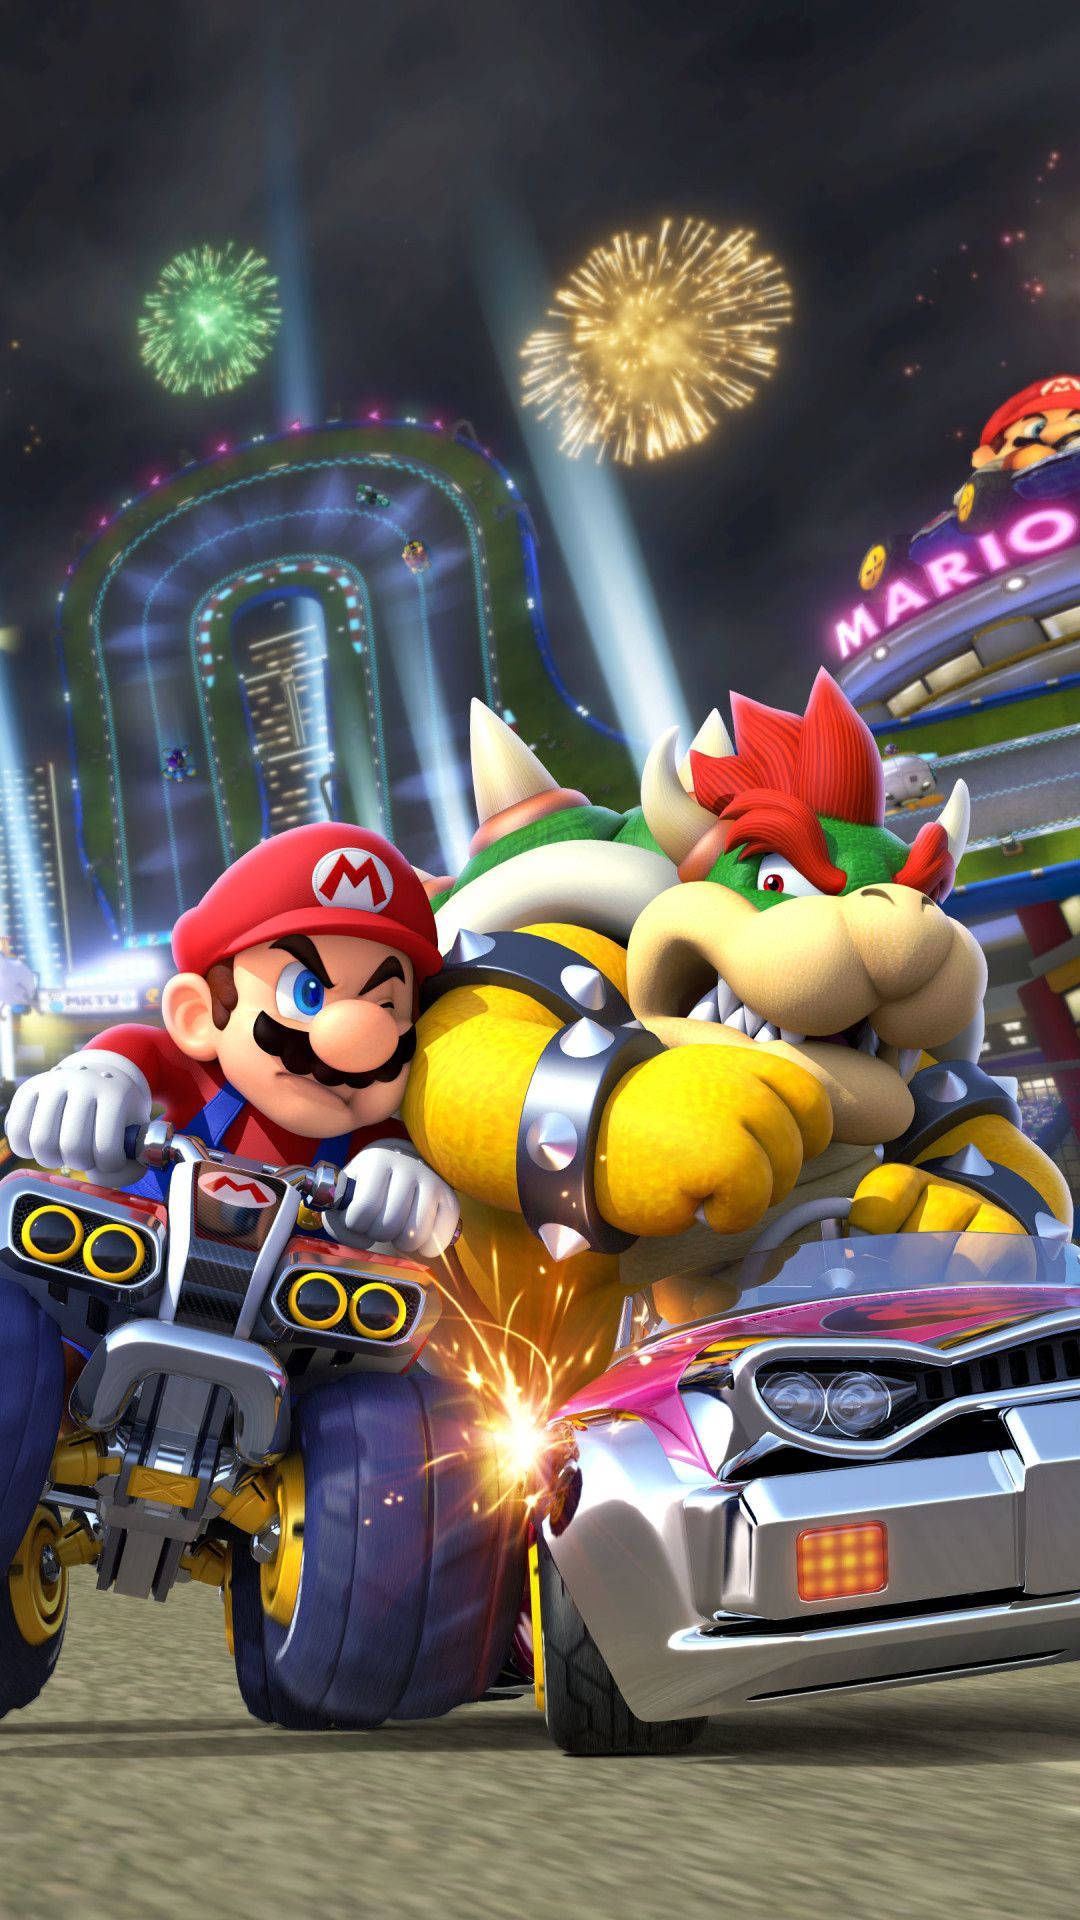 Mario Kart 8 for the Nintendo Wii U is a fun game for all ages. - Bowser